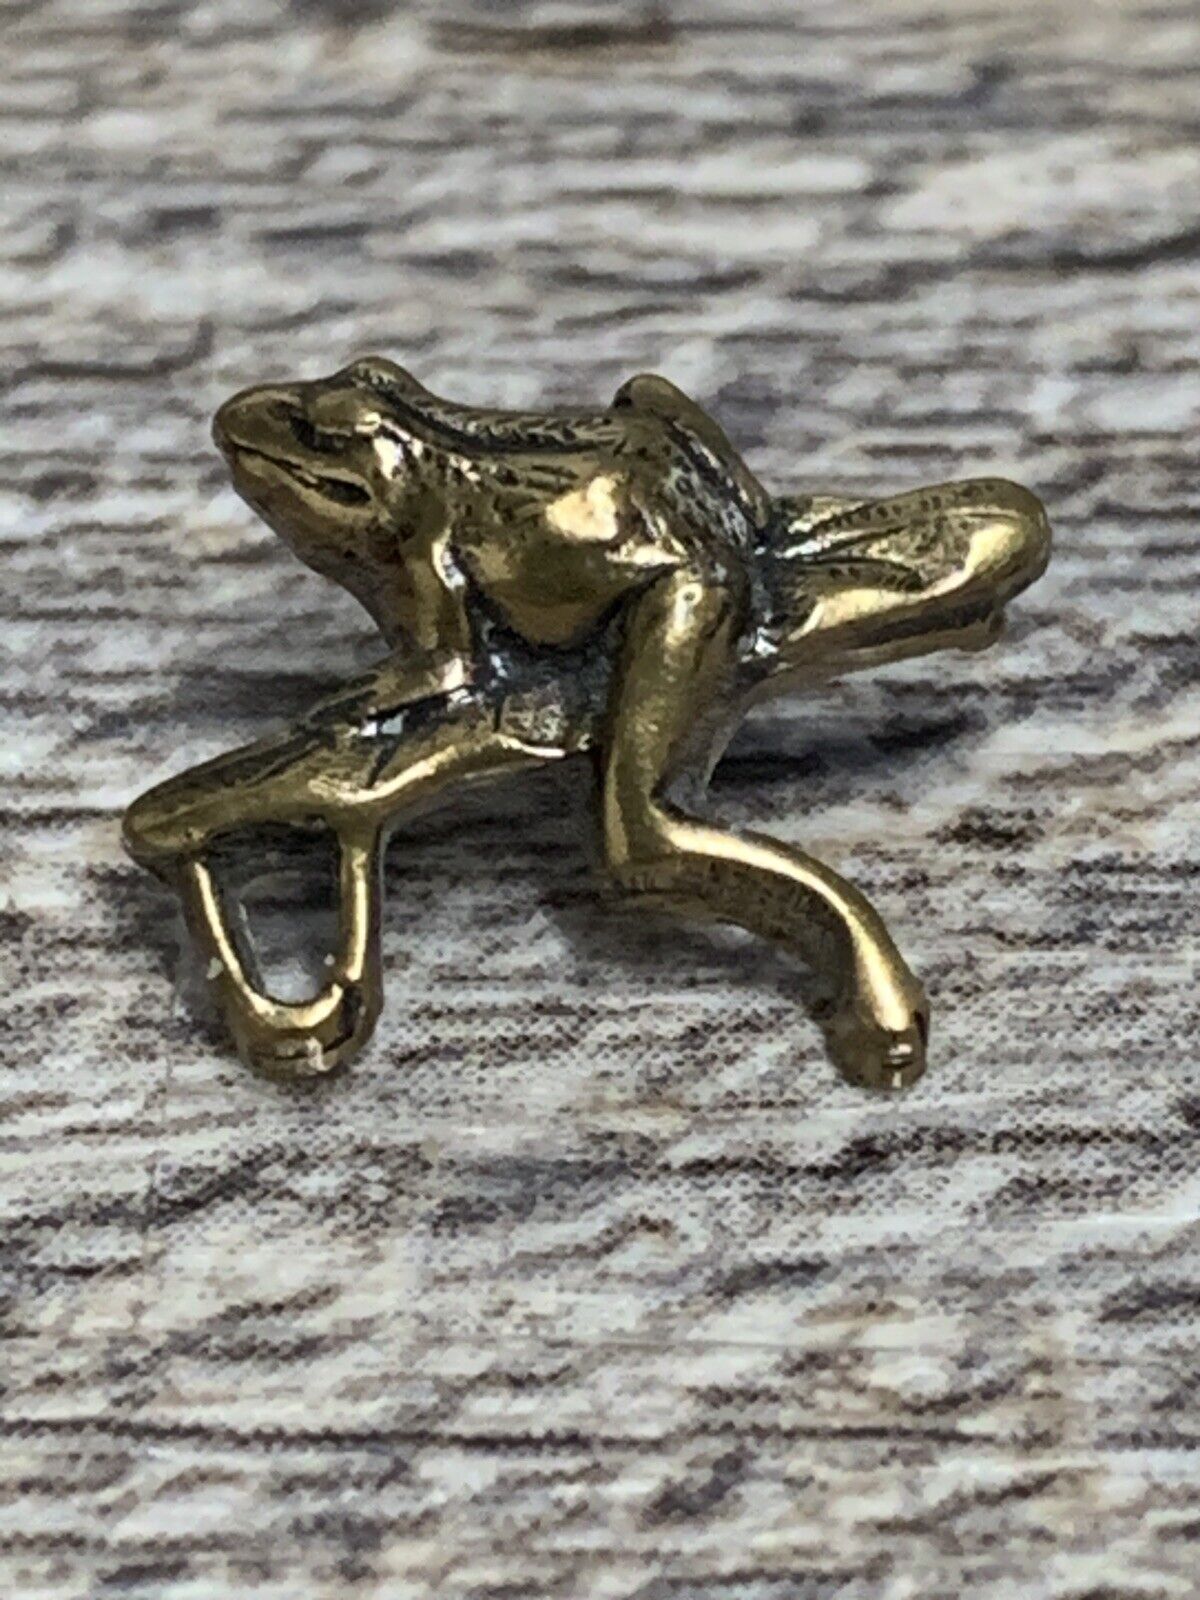 ADORABLE TINY FROG ON A LILY PAD Vintage , Pin Button Tie Tack Hat Lapel